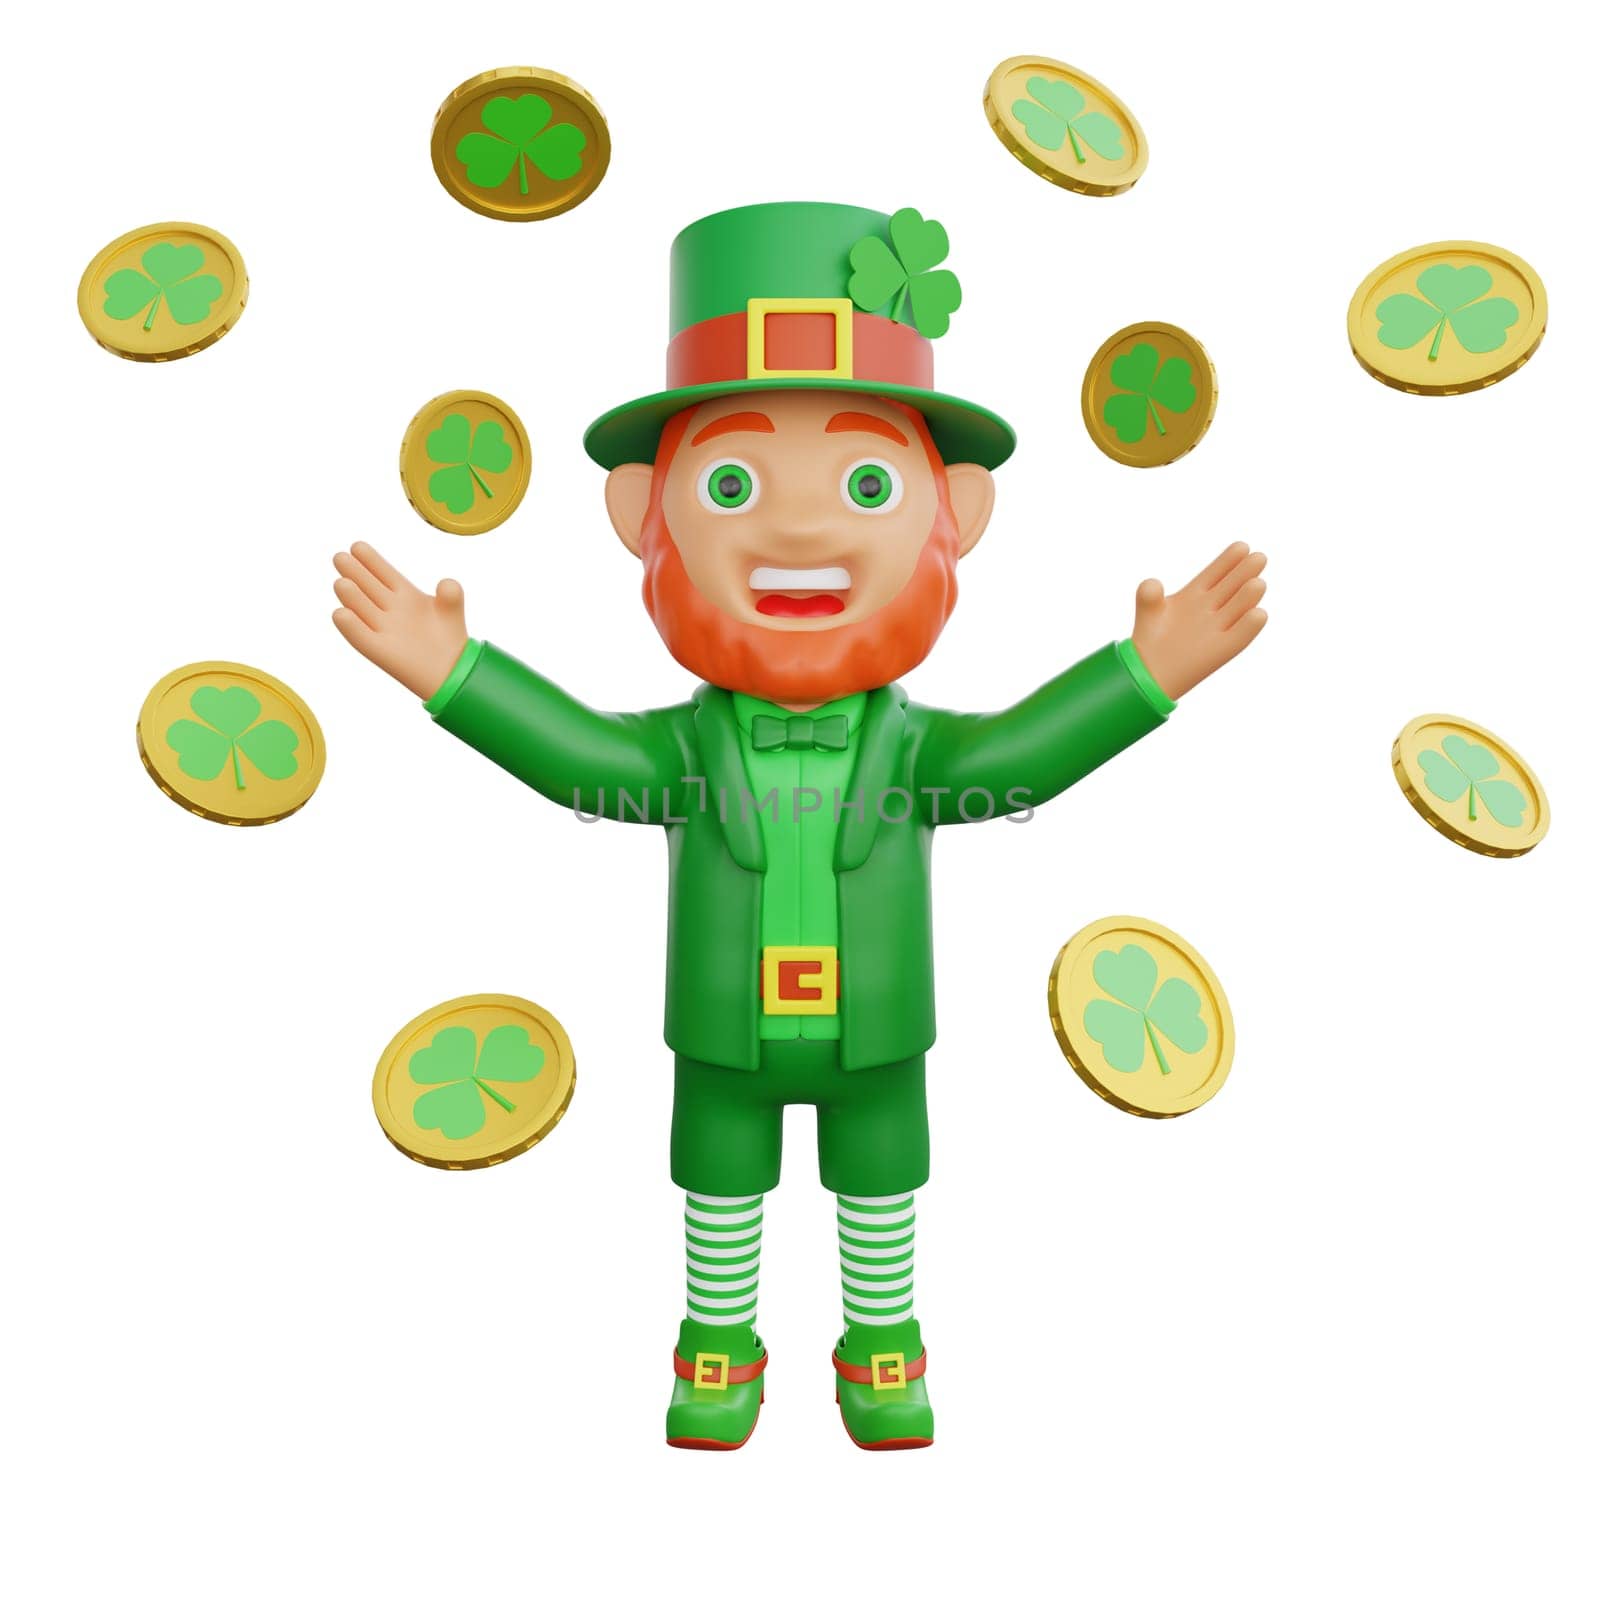 3D illustration of St. Patrick's Day character leprechaun surrounded by golden coins by Rahmat_Djayusman